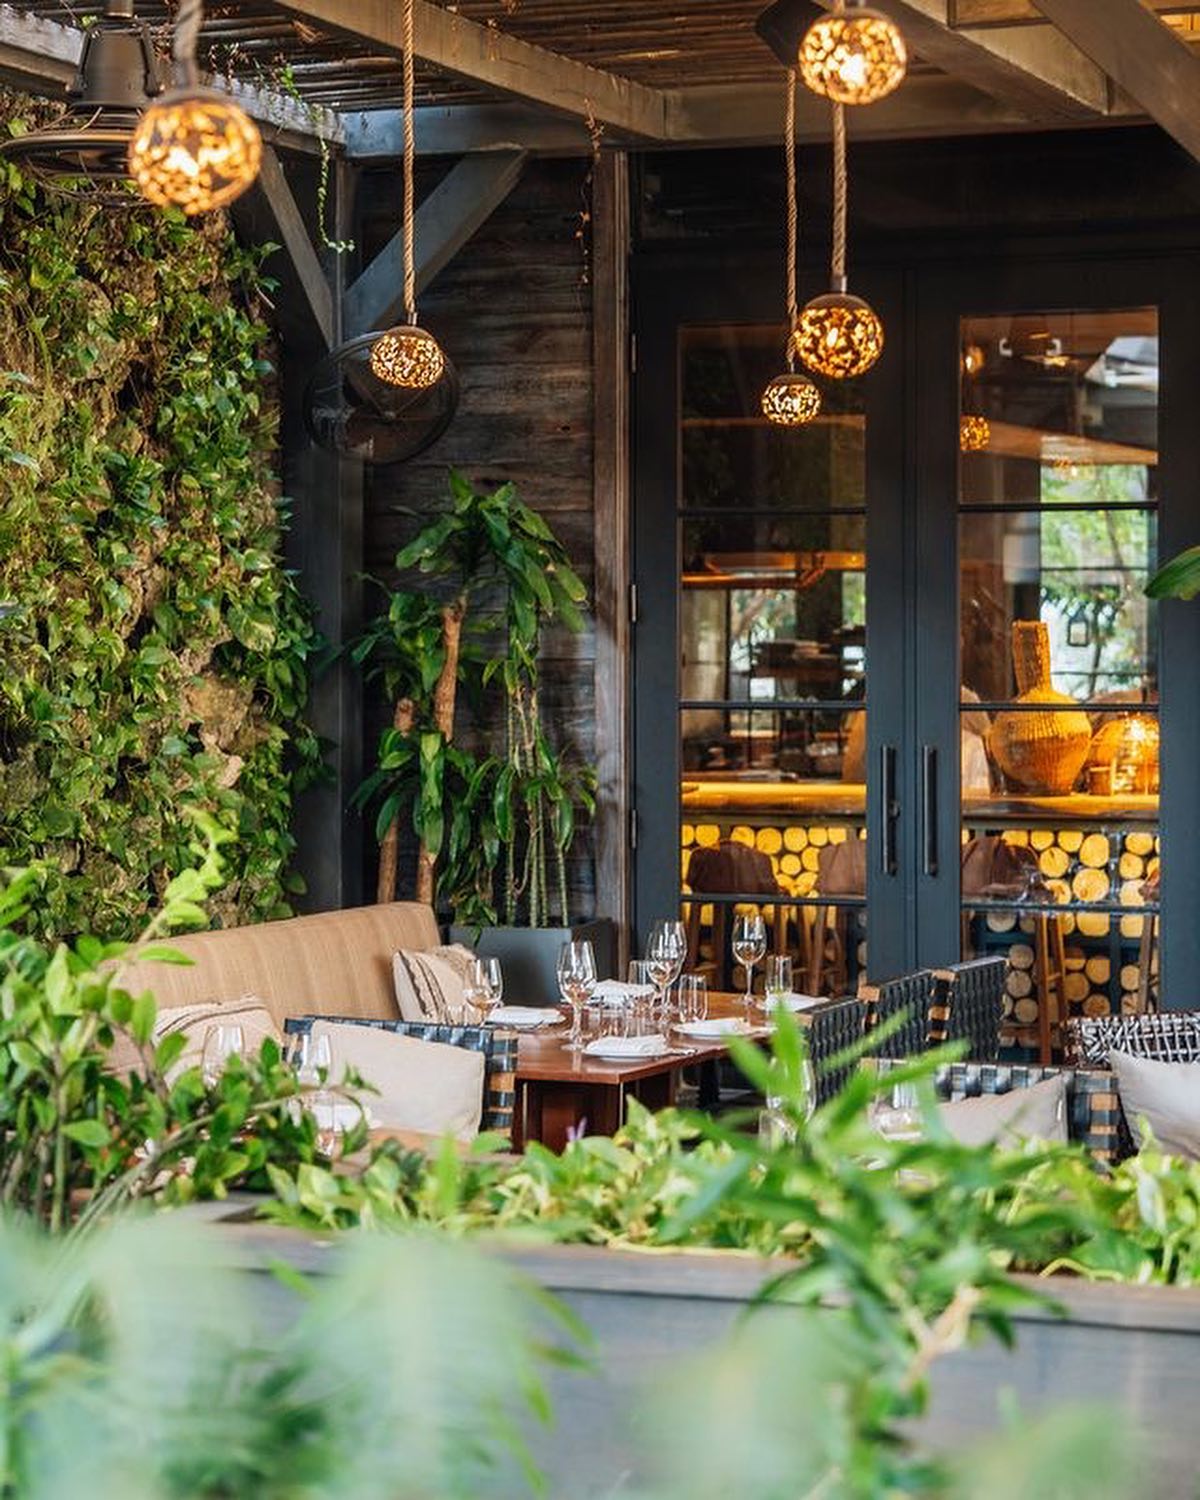 A rooftop oasis #atEAST – our signature restaurant @quinto.miami blends fire-touched flavors with a charming outdoor dining vibe.